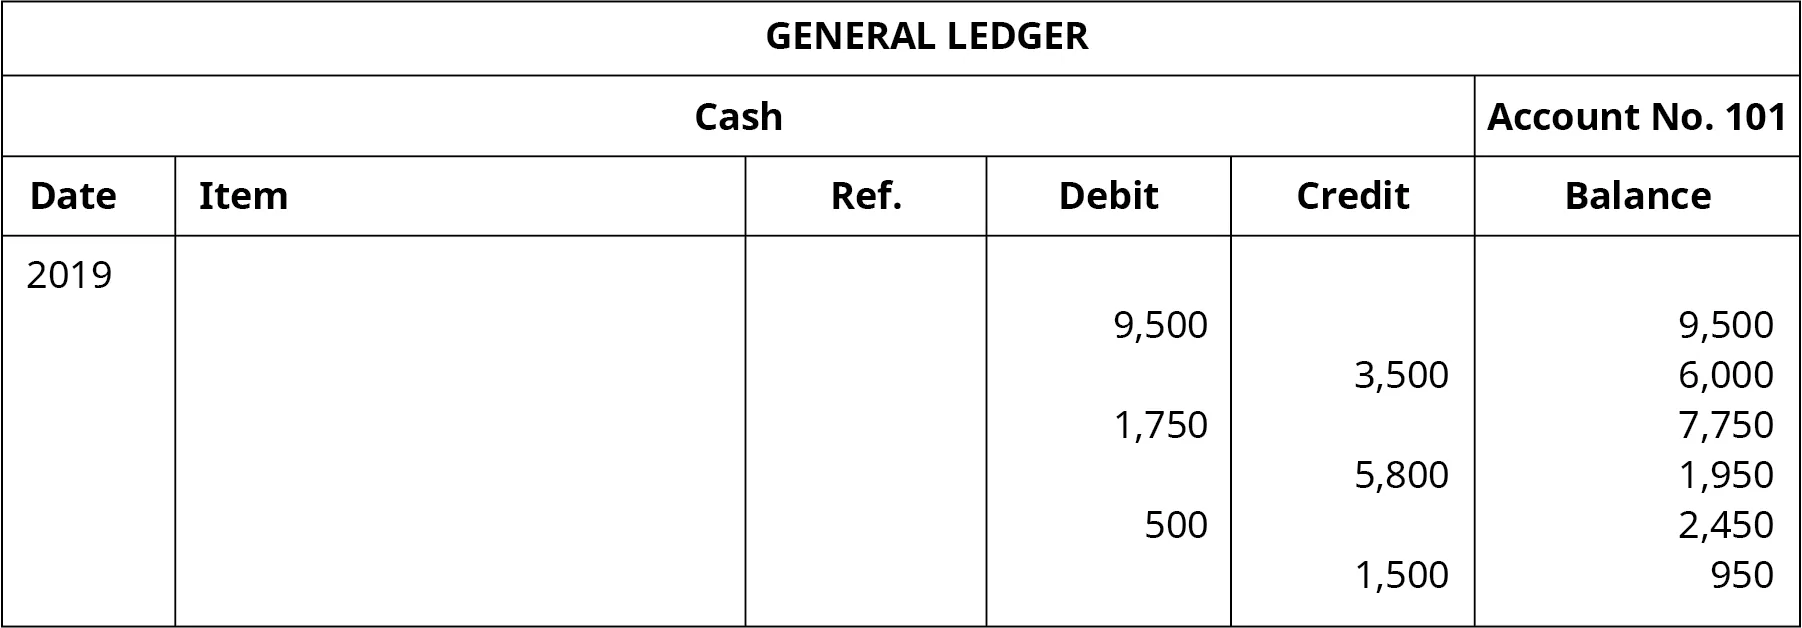 A General Ledger titled “Cash Account No. 101” with six columns. Date: 2019. Six columns labeled left to right: Date, Item, Reference, Debit, Credit, Balance. Debit: 9,500; Balance: 9,500. Credit: 3,500; Balance: 6,000. Debit: 1,750; Balance: 7,750. Credit: 5,800; Balance: 1,950. Debit: 500; Balance: 2,450. Credit: 1,500; Balance: 950. Credit: 1,200; Balance: 250.